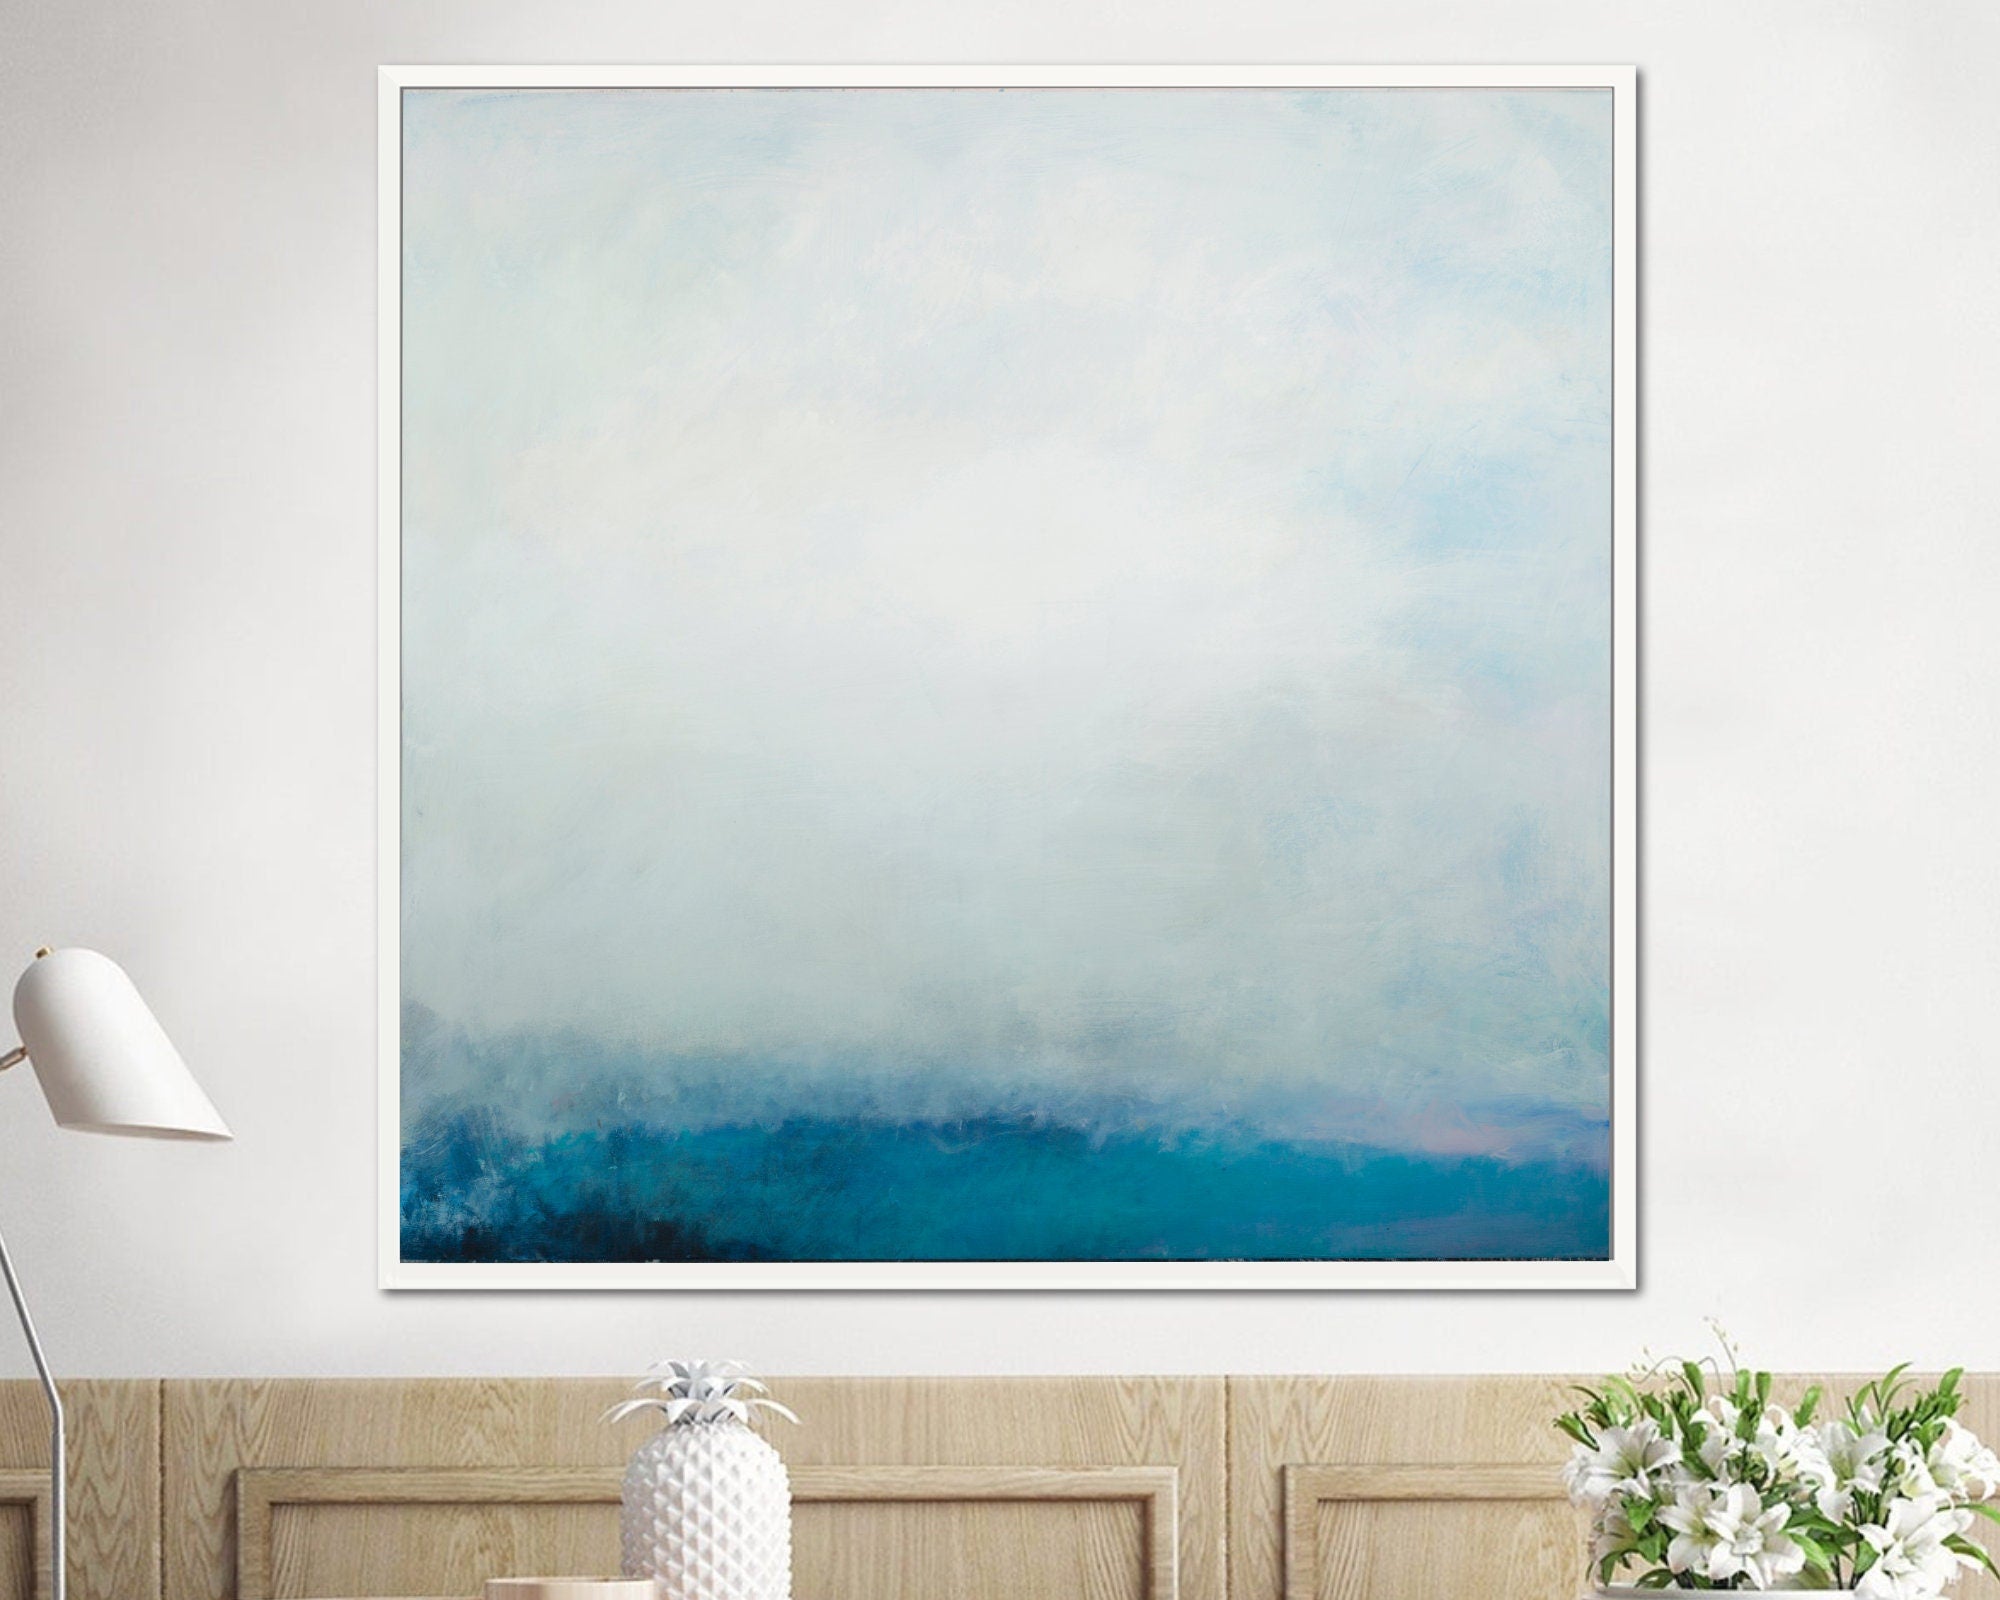 Teal wall art original abstract painting, large gallery wall art on canvas, extra large ocean painting, living room art Camilo Mattis